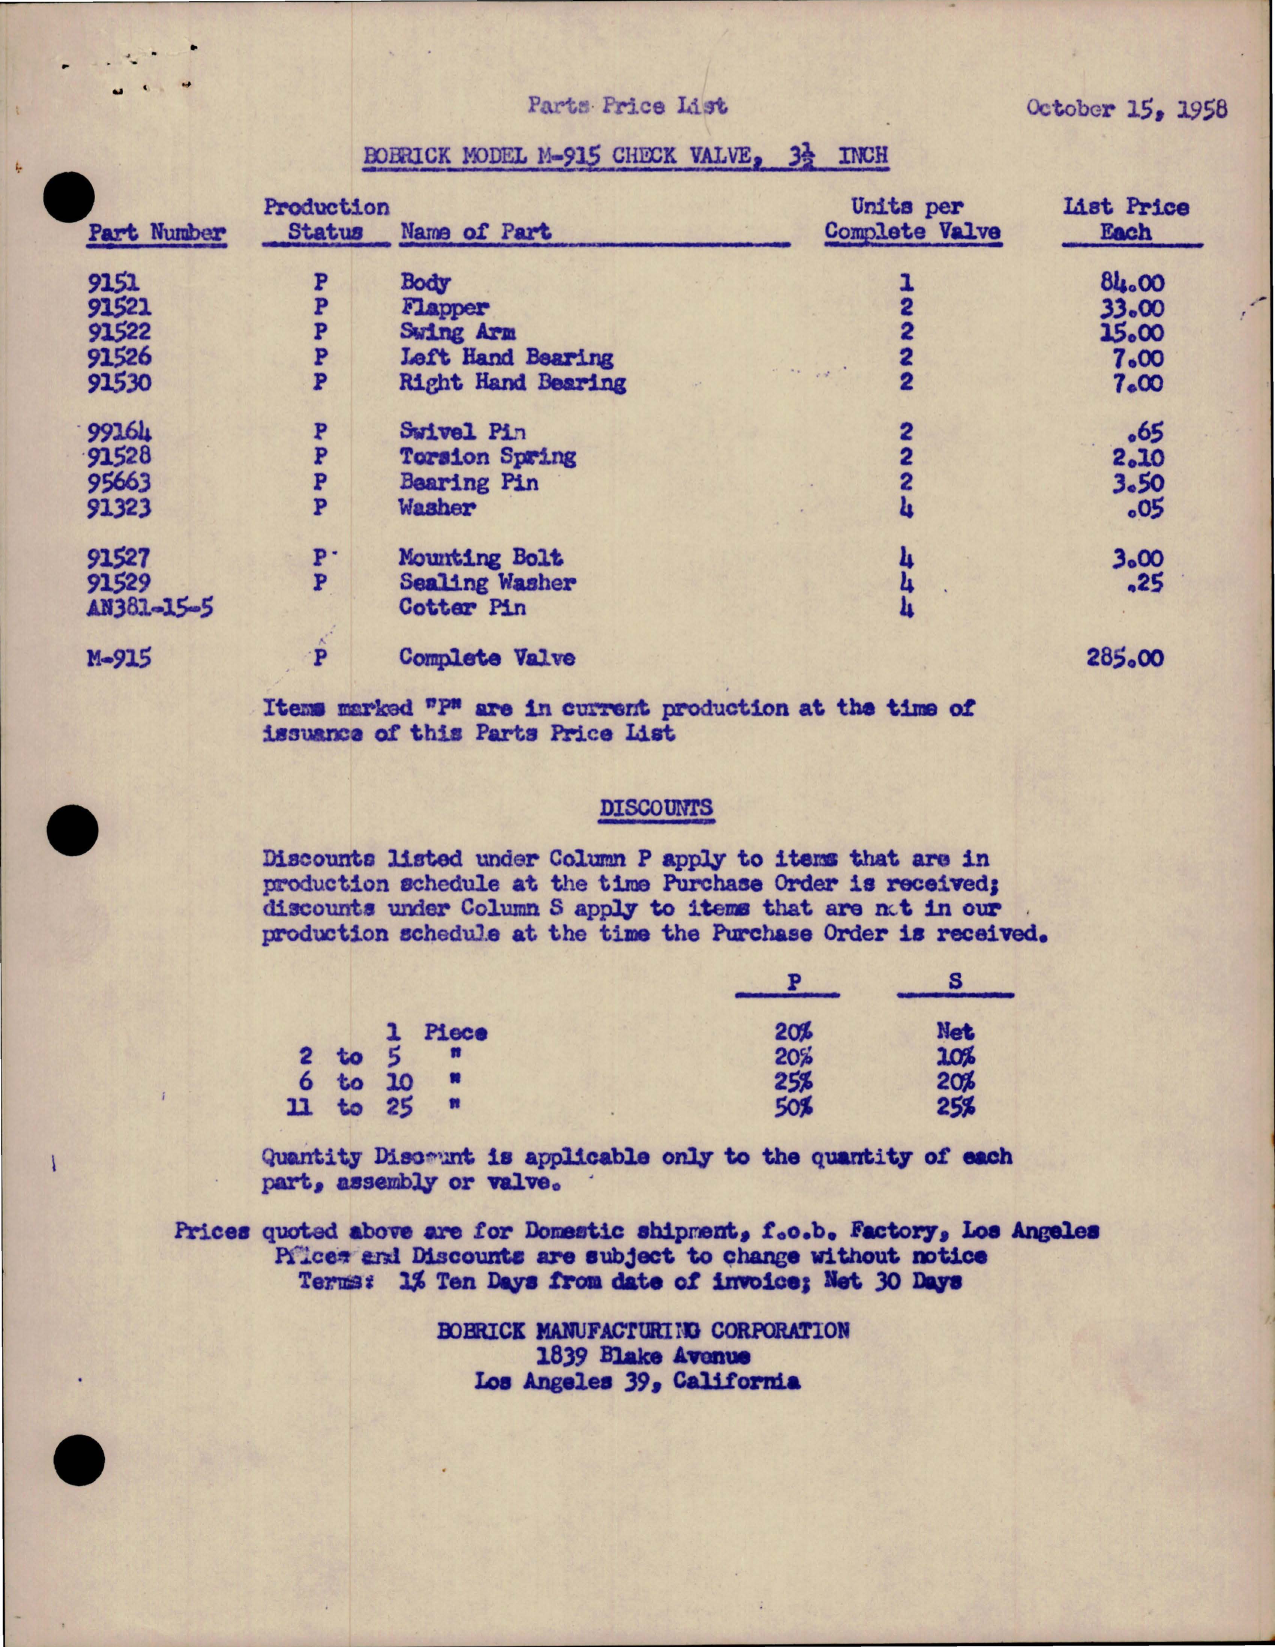 Sample page 1 from AirCorps Library document: Parts Price List for Check Valve 3 1-2 inch - Model M-915 